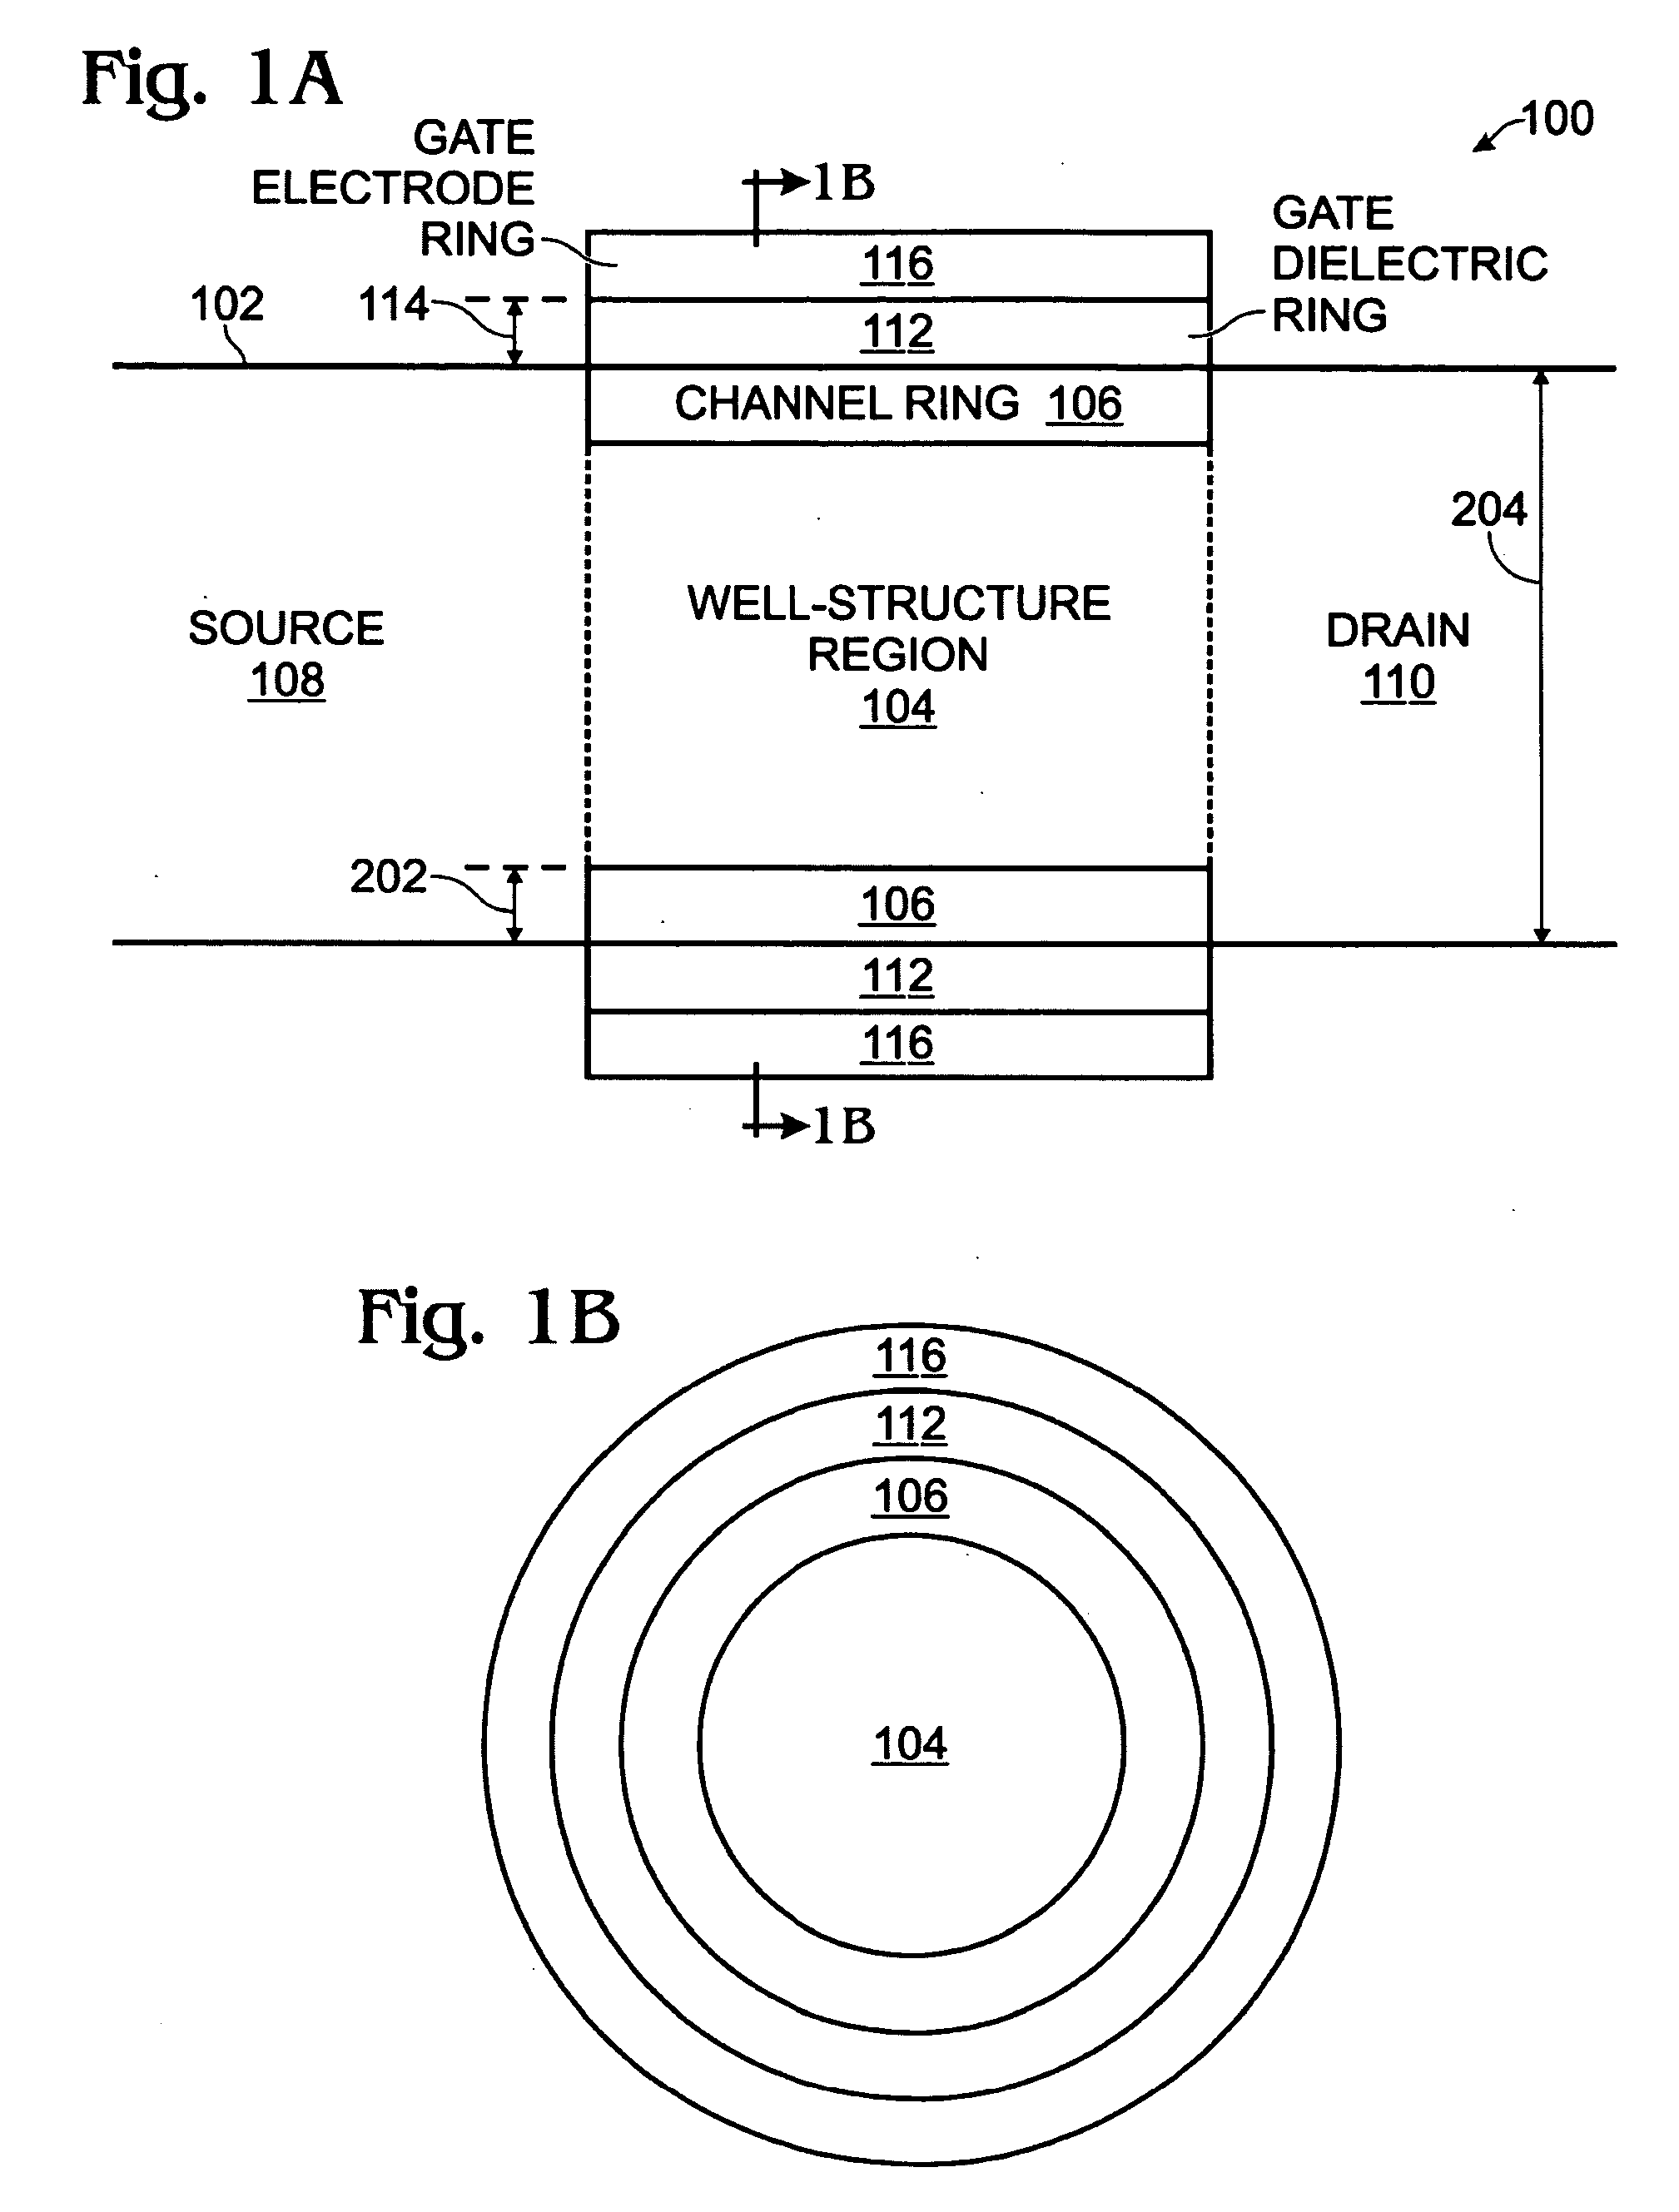 Well-Structure Anti-Punch-through Microwire Device